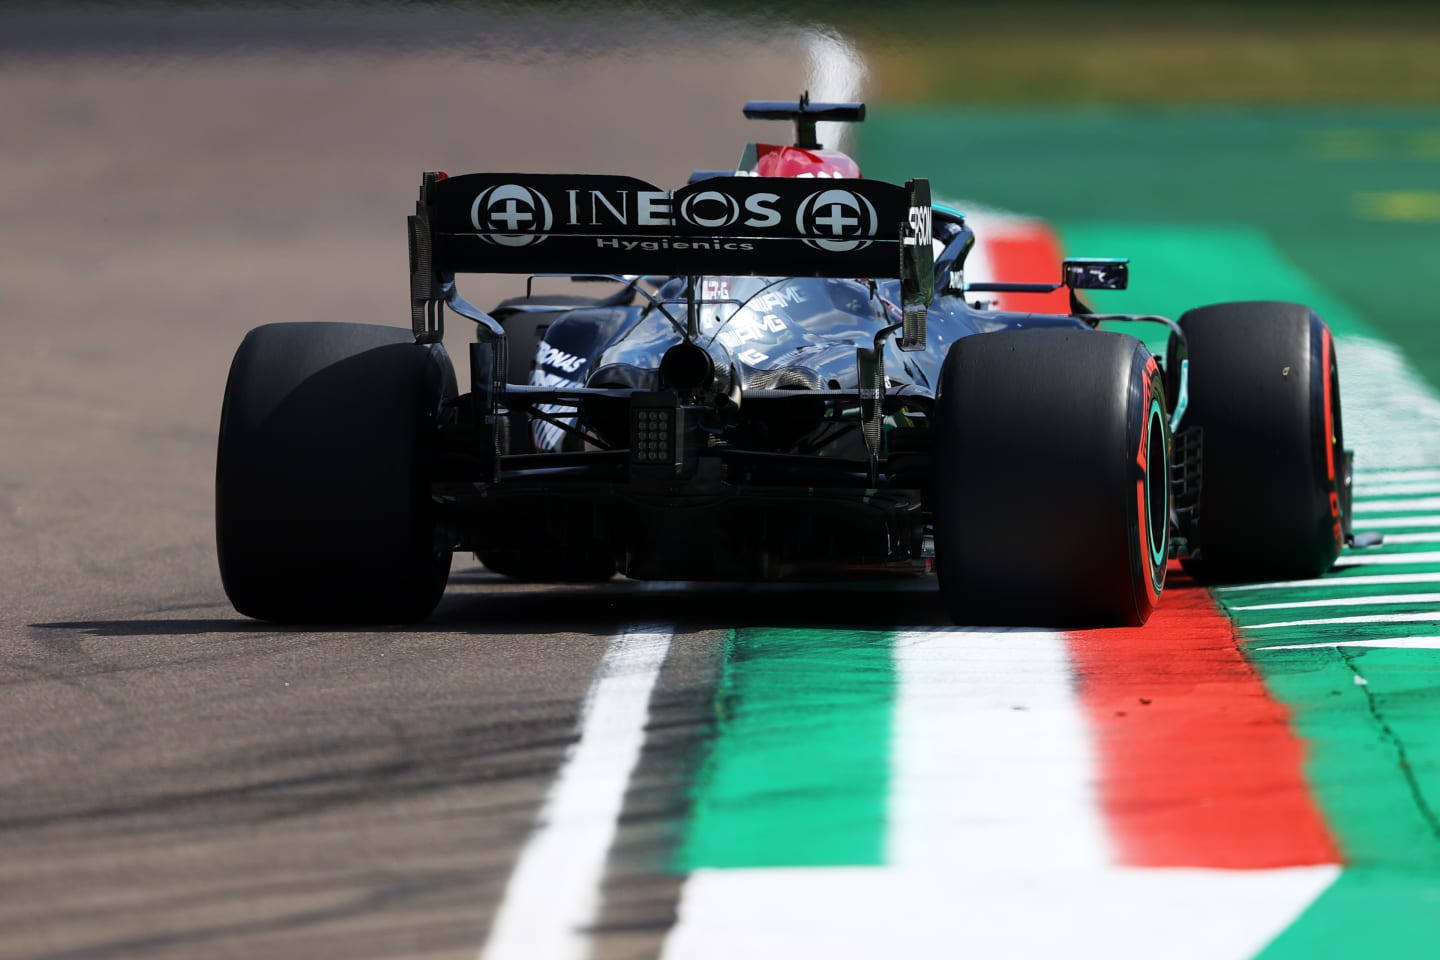 IMOLA, ITALY - APRIL 16: Lewis Hamilton of Great Britain driving the (44) Mercedes AMG Petronas F1